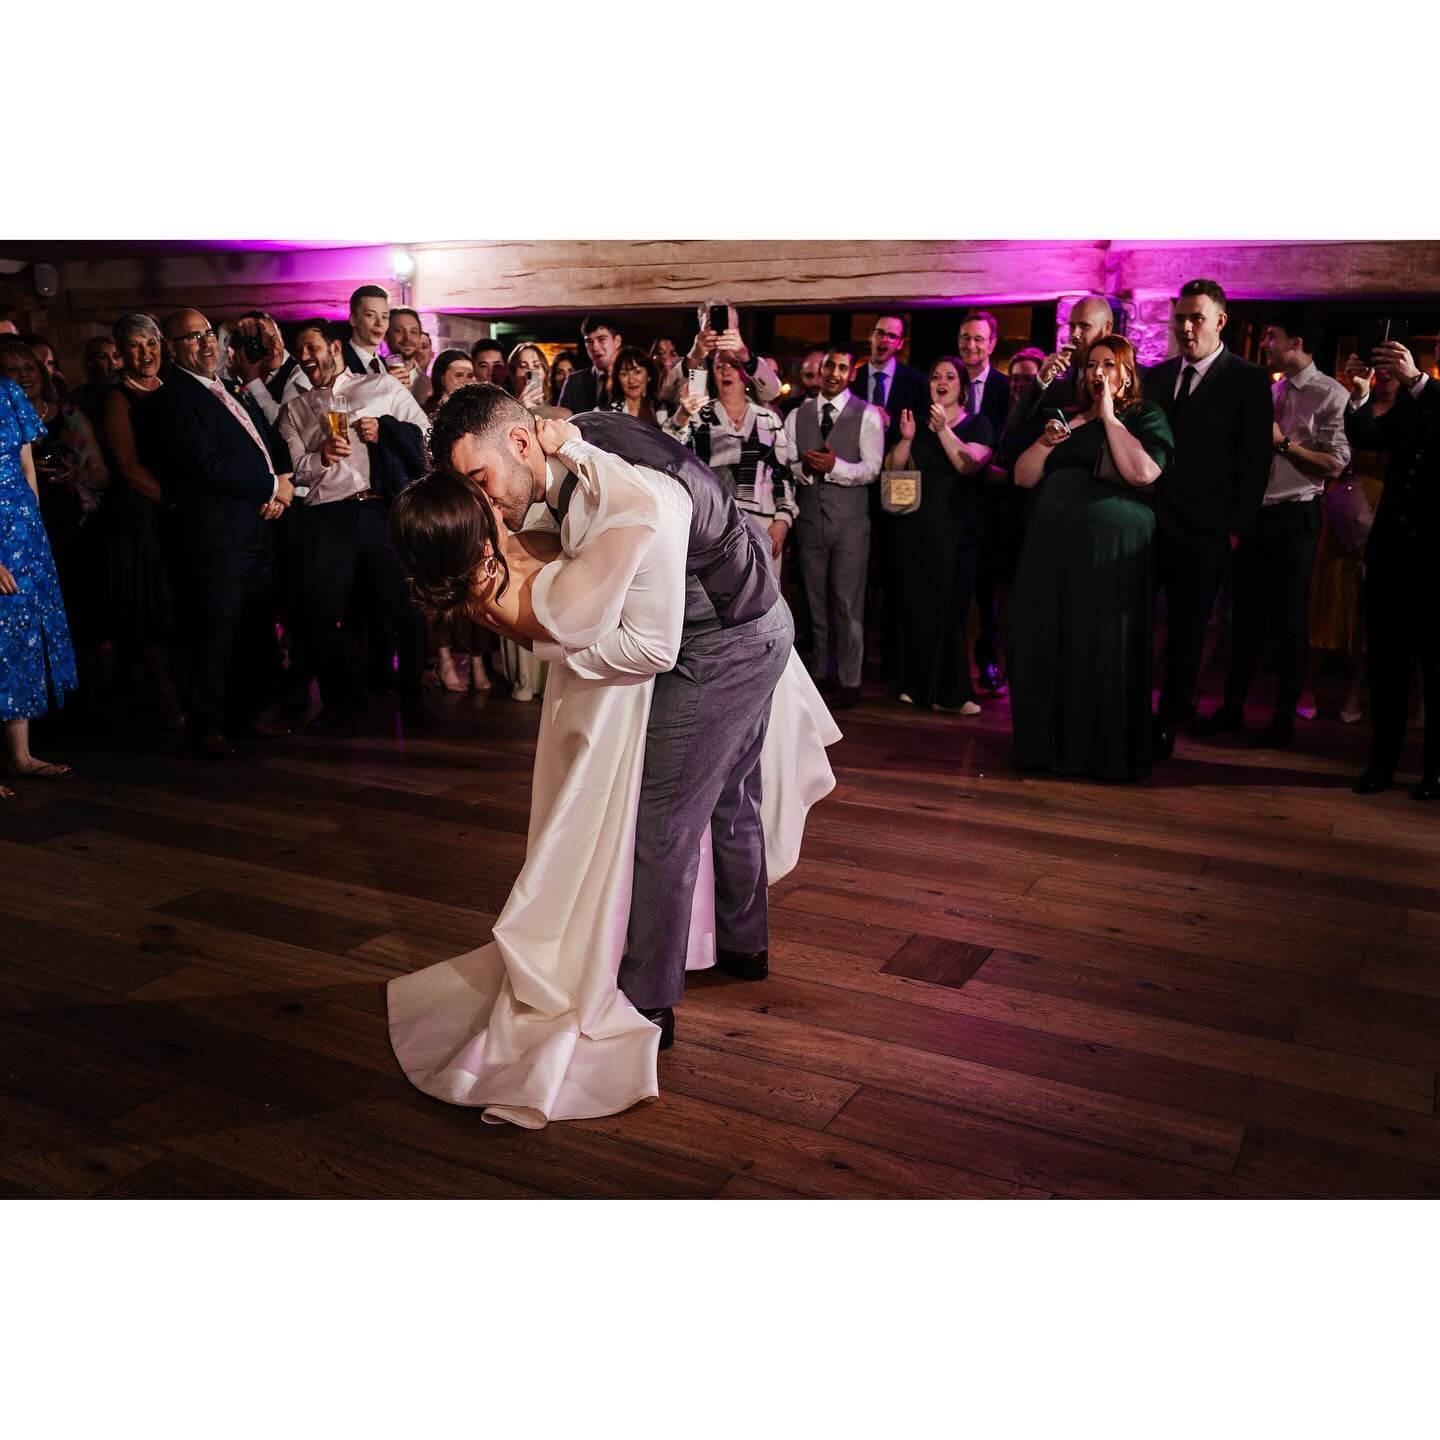 Friday looked a little bit like this&hellip;. Tight hugs, loads of laughter and all the dancing. Throw in some Gail force winds for fun and this is what you get. 

Absolutely epic day. Wonderful family. Awesome bridal party. Gorgeous couple. Twenty f